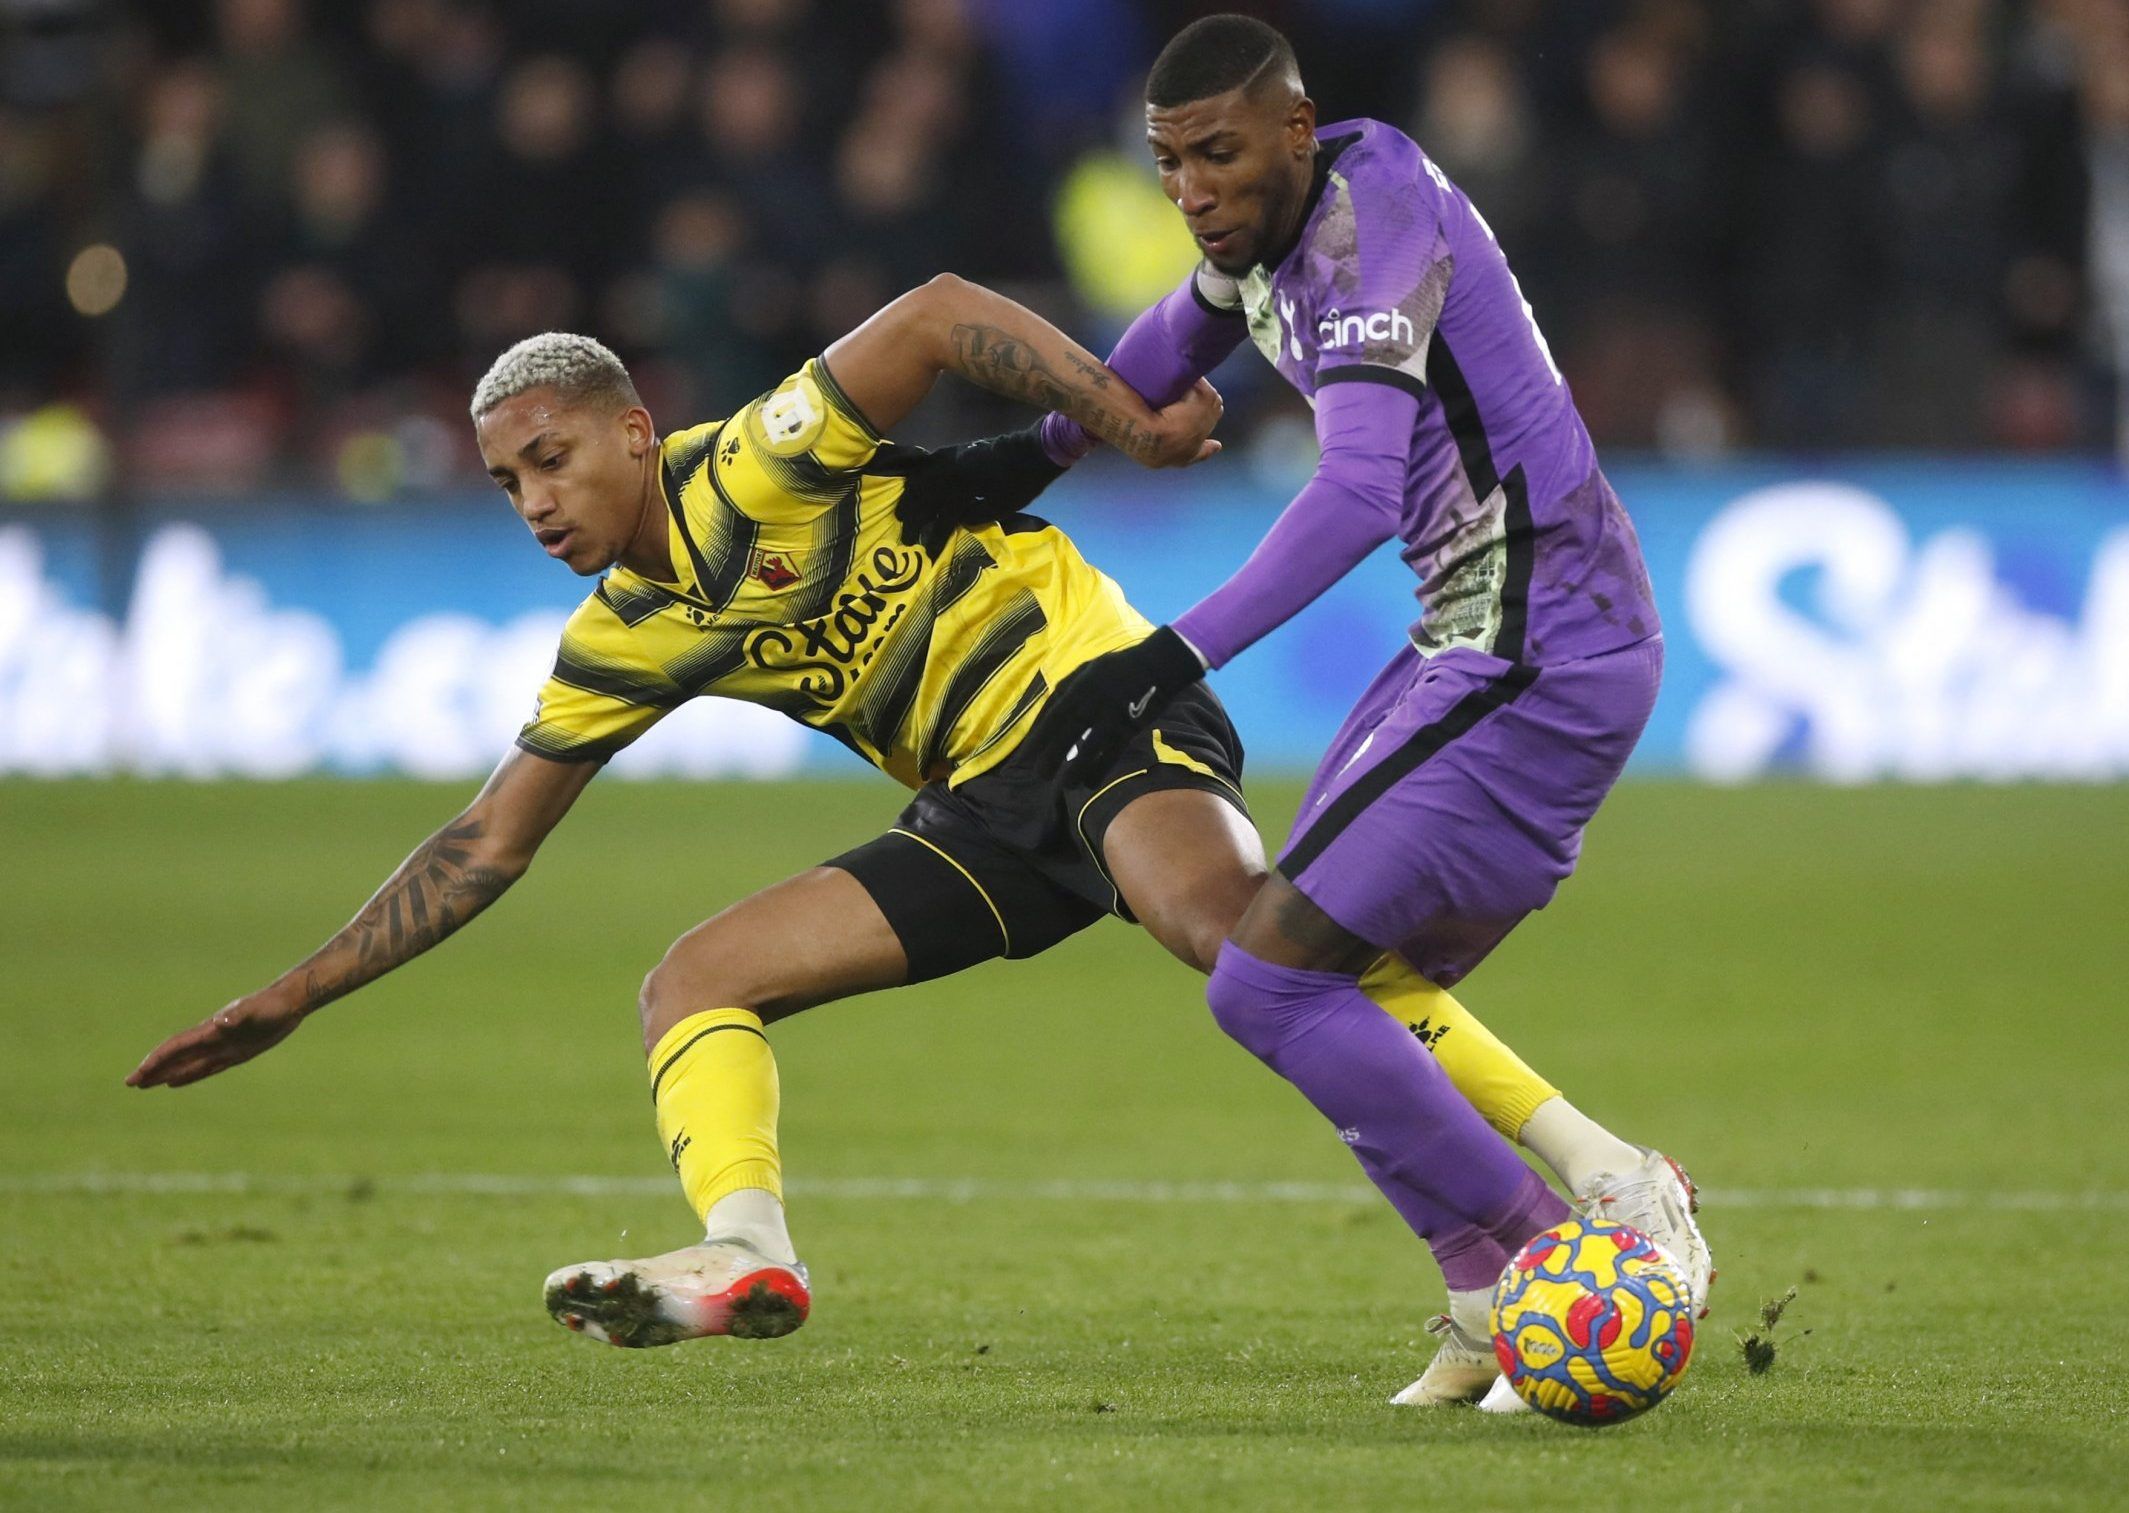 Spurs defender Emerson Royal battles Watford's Joao Pedro in their Premier League clash at Vicarage Road